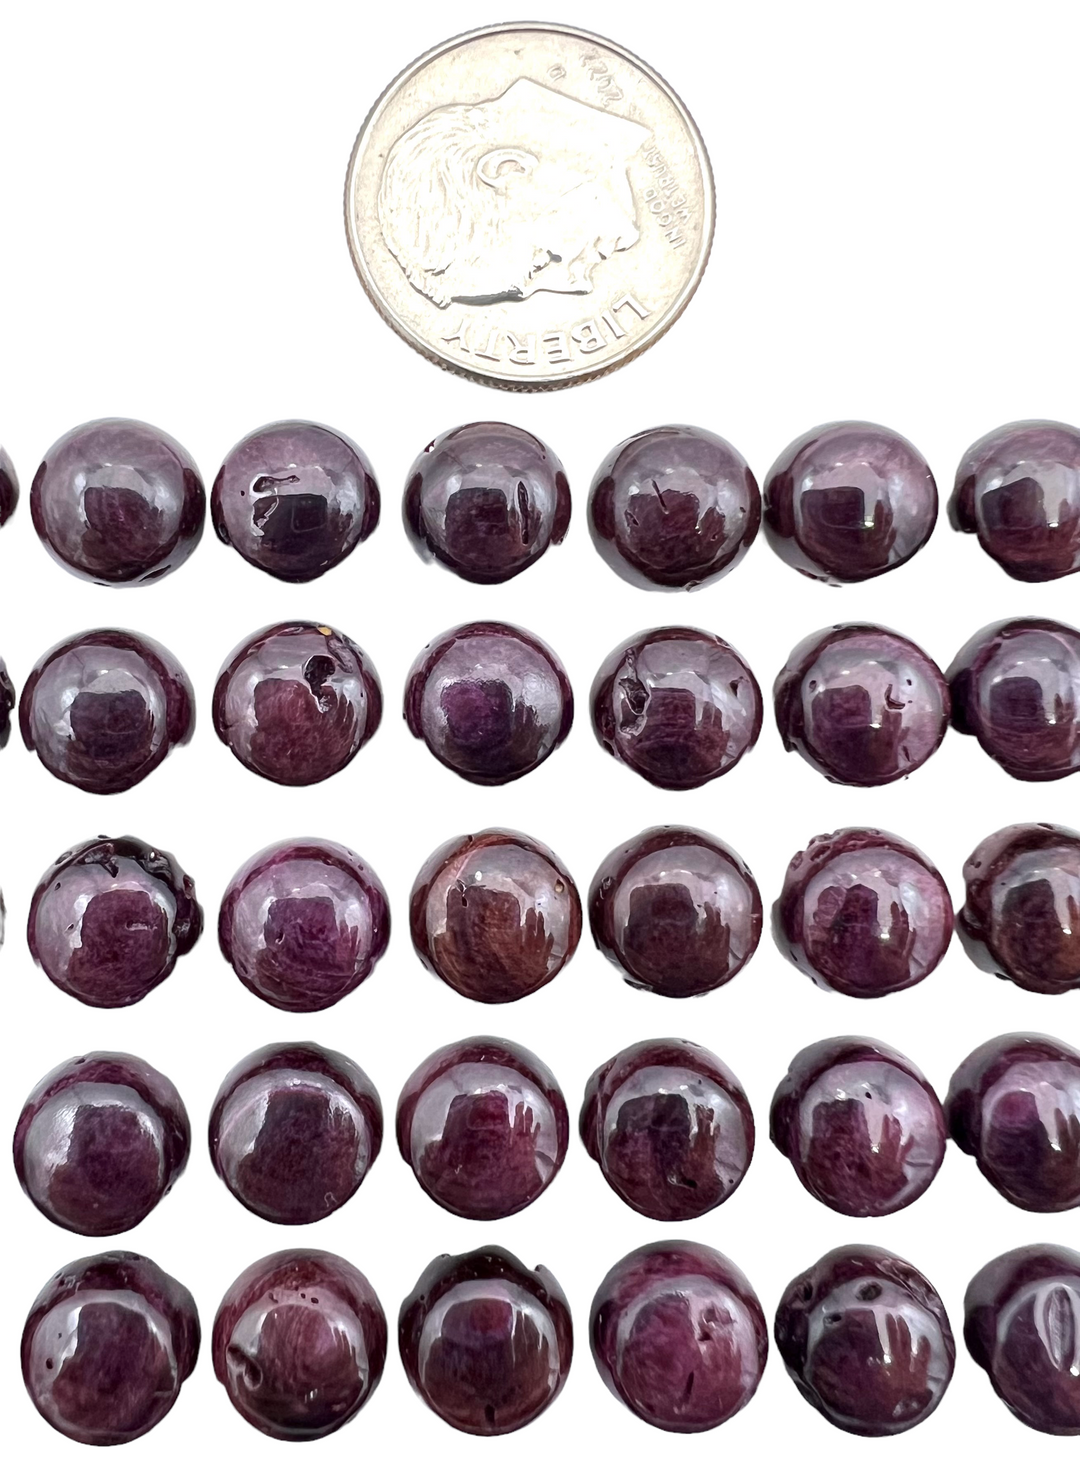 RARE High Quality Purple Spiny Oyster Cabochons 8mm Round